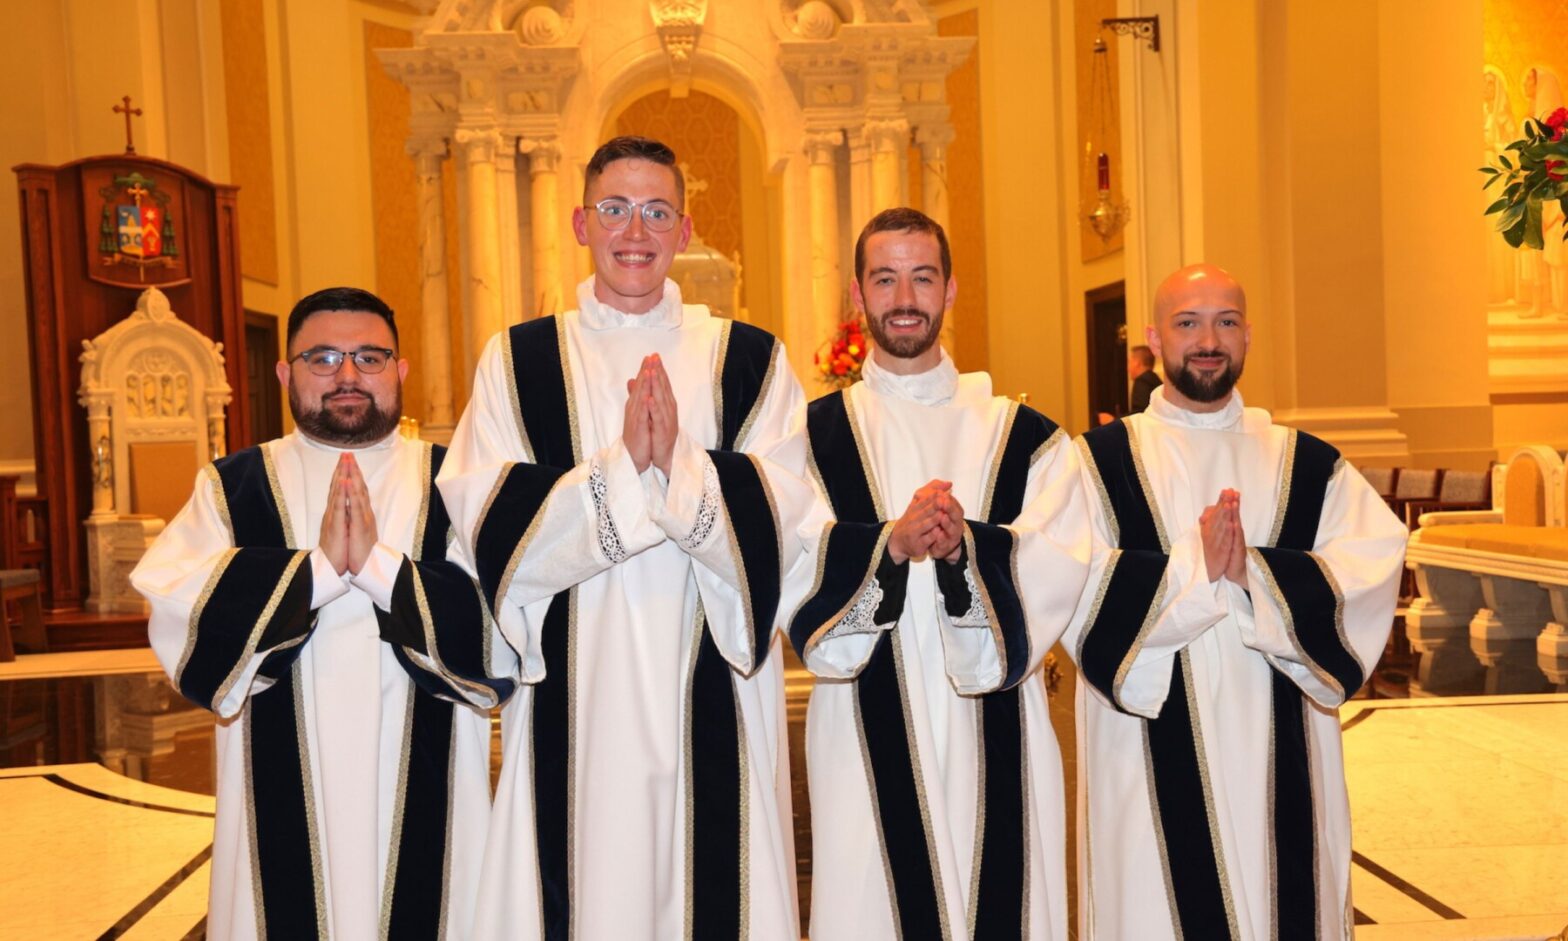 Matthew Cooke with other seminarians at Deacon ceremony.